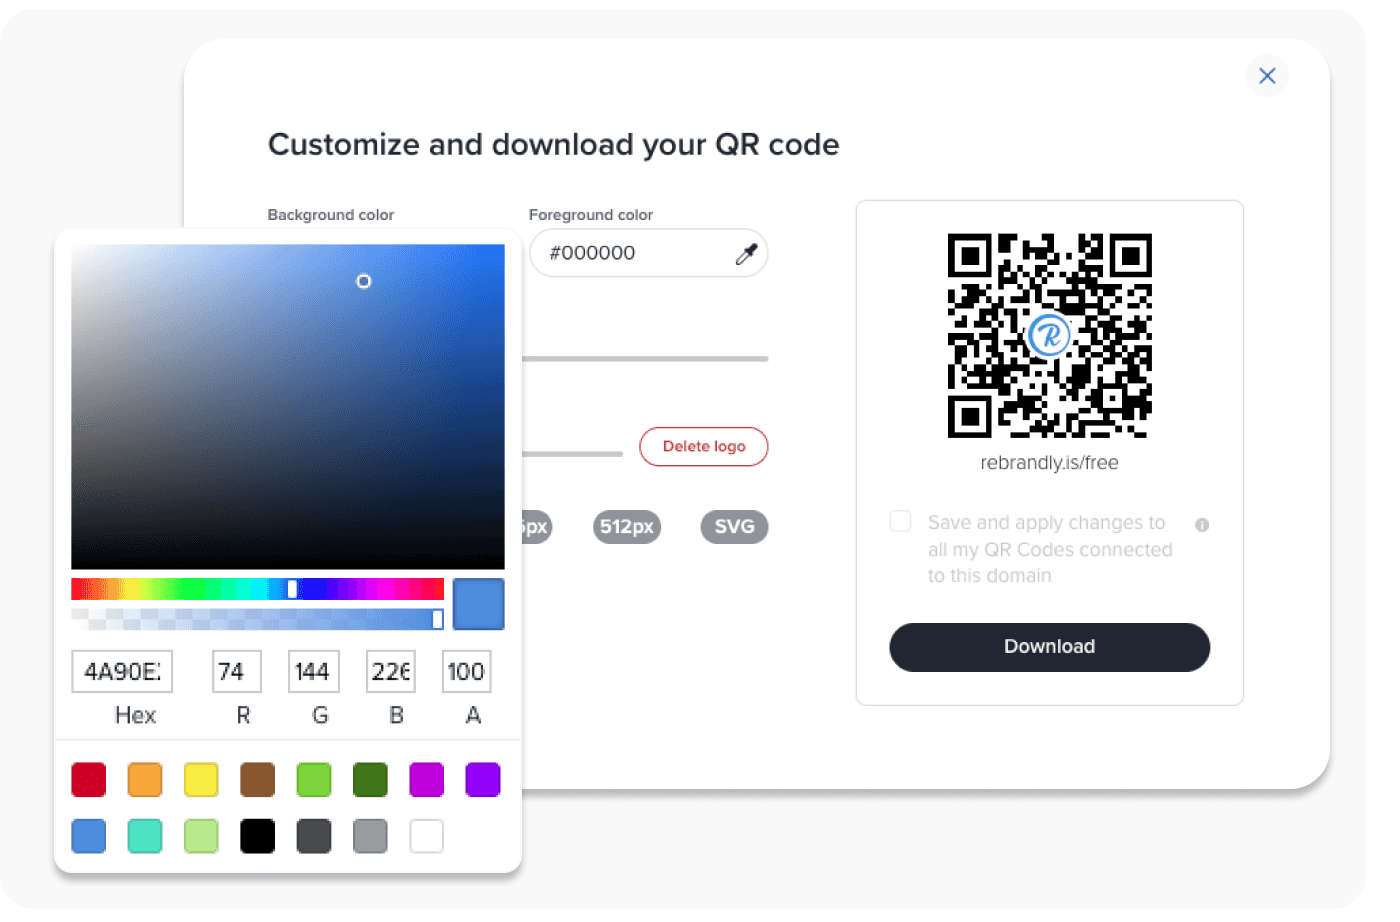 Rebrandly’s QR code generator window showing headline text that reads “customize and download your QR code” with a pop-up of a color picker on the left and a preview on the right showing a QR code for the URL “rebrandly.is/free” and a Download button at the bottom.